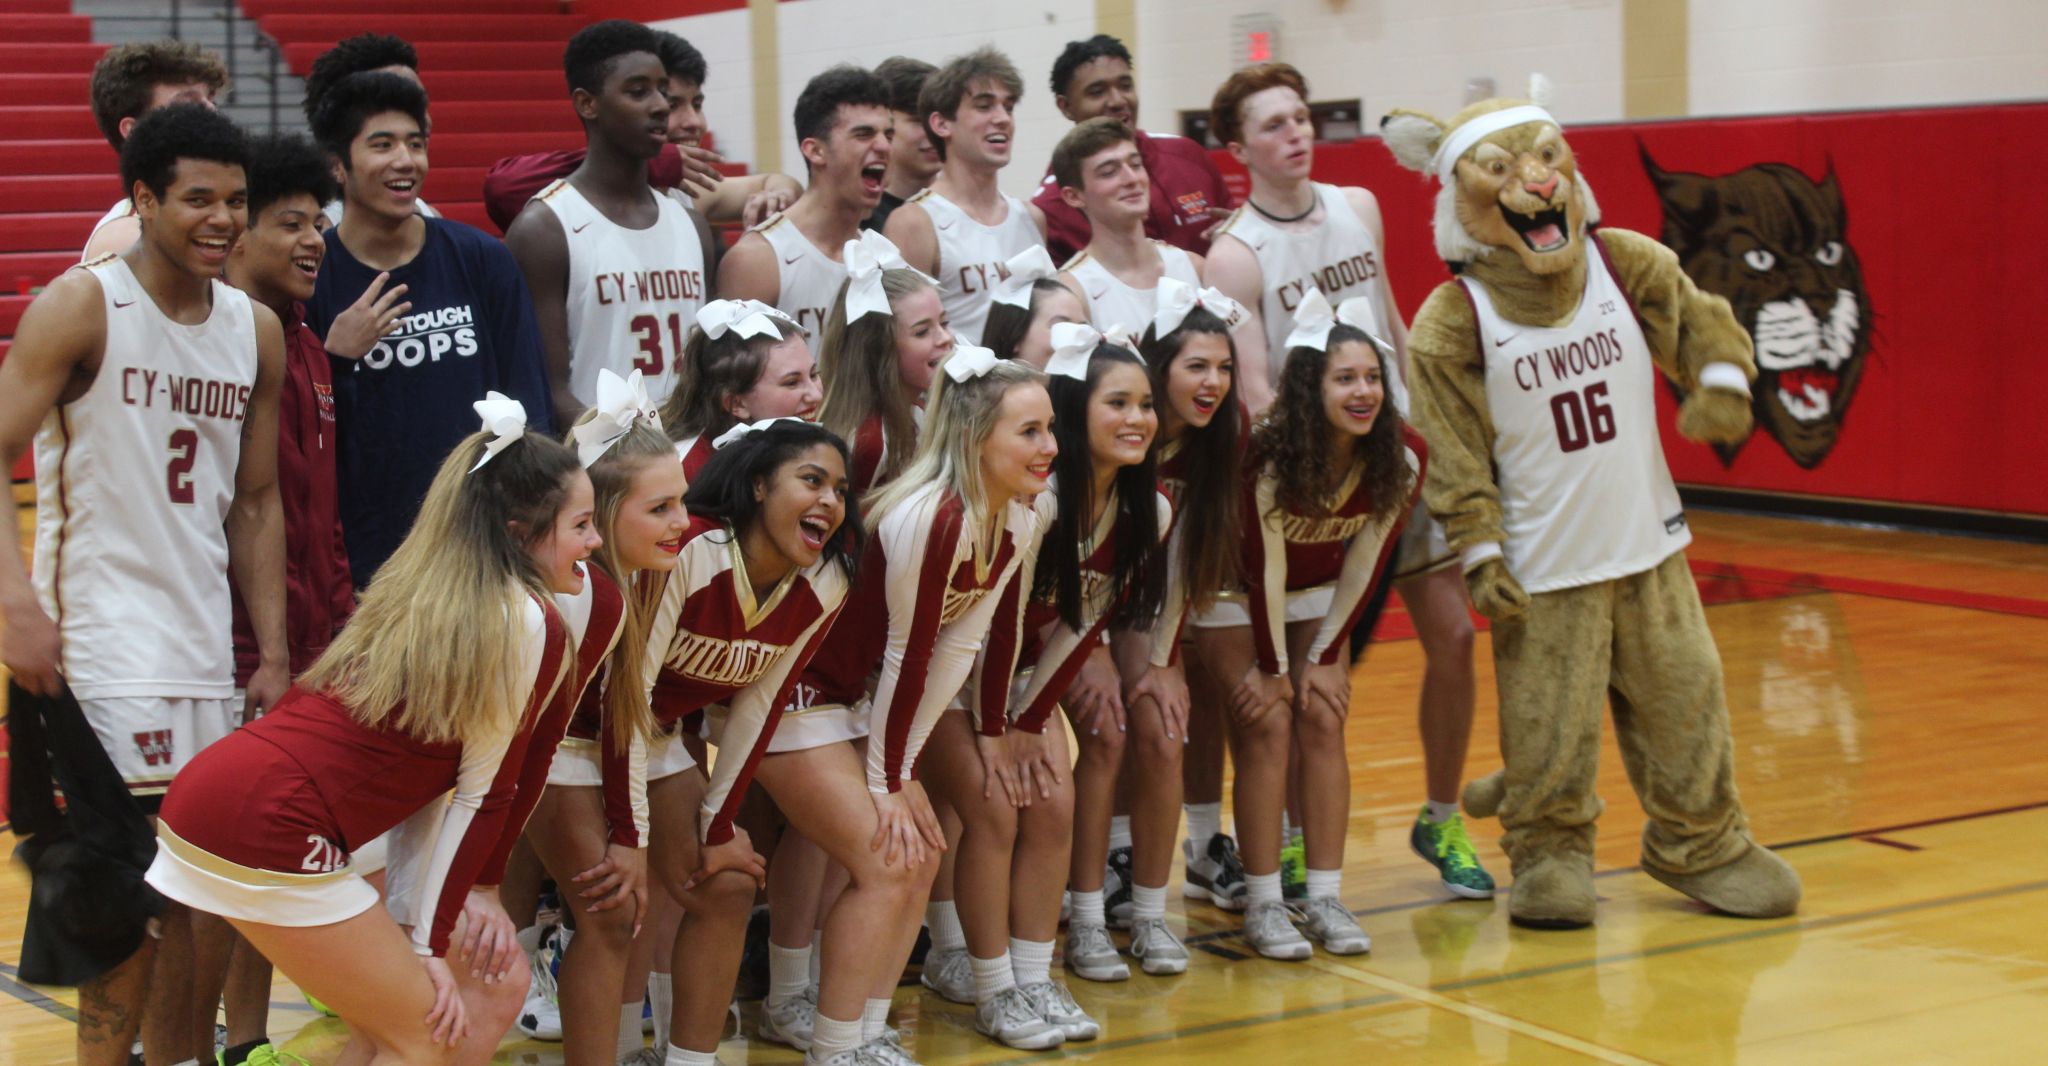 Boys basketball Late run fuels Cy Woods’ comeback win over Cy Park